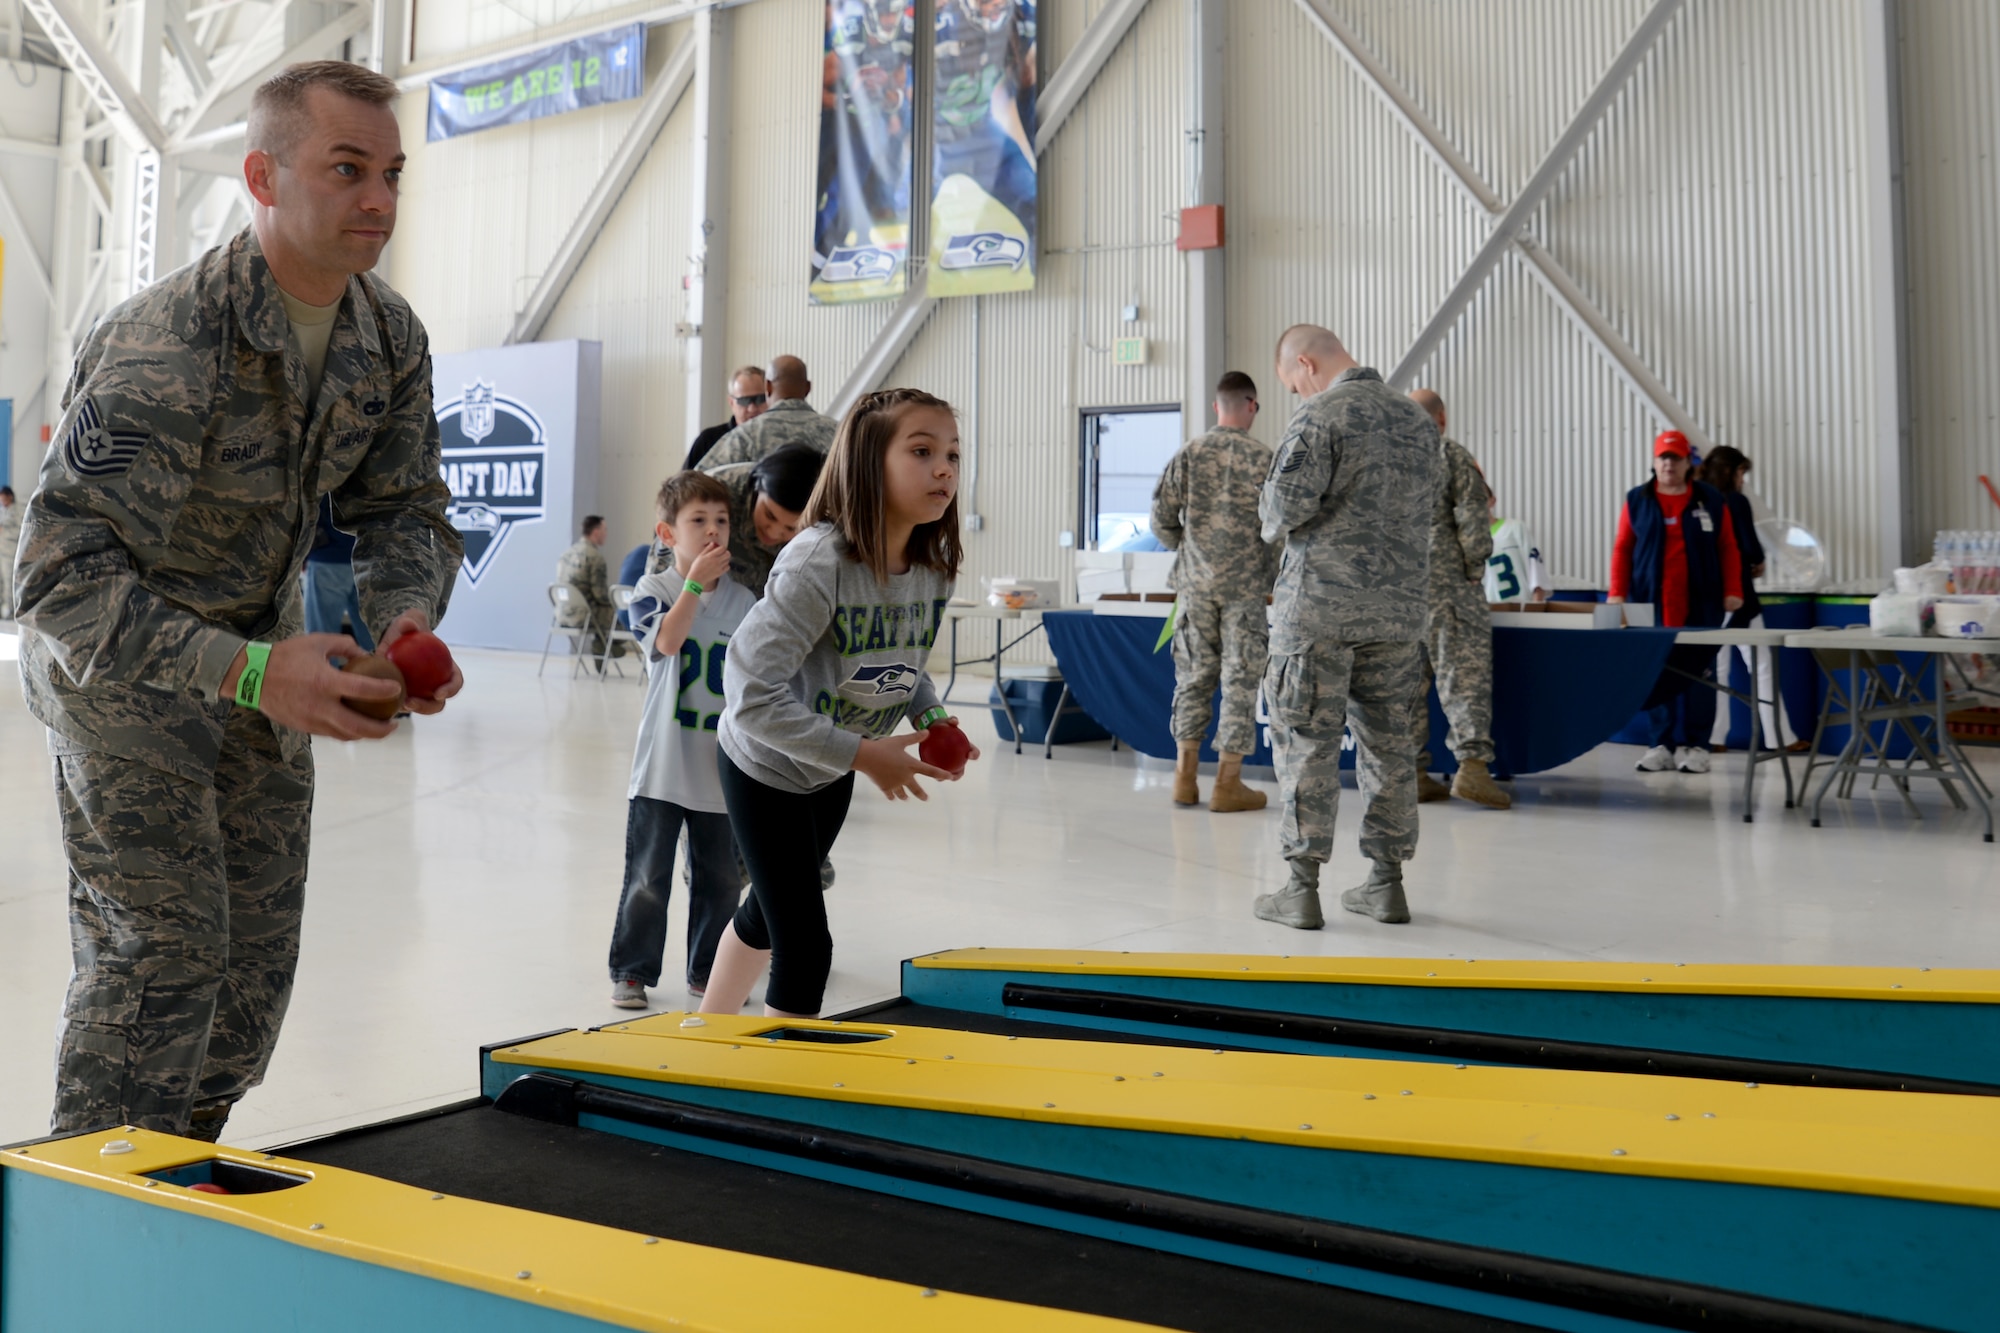 Tech. Sgt. Tim Brady, 62nd Aerial Port Squadron Air Terminal Operations Center senior controller, plays skee ball with his daughter during the Seattle Seahawks draft day event on Joint Base Lewis-McChord, Wash., May 2, 2015. More than 1,500 fans attended the event which included a mock NFL Combine, numerous gaming events to include armchair quarterback, shuffle board, pool tables, a football toss and kick game, photos with the 2013 Lombardi and 2014 National Football Conference championship trophies, video gaming, autographs from eight different Seahawk players, free food and drink and numerous military statics from across the Sound. (U.S. Air Force photo\ Staff Sgt. Tim Chacon) 